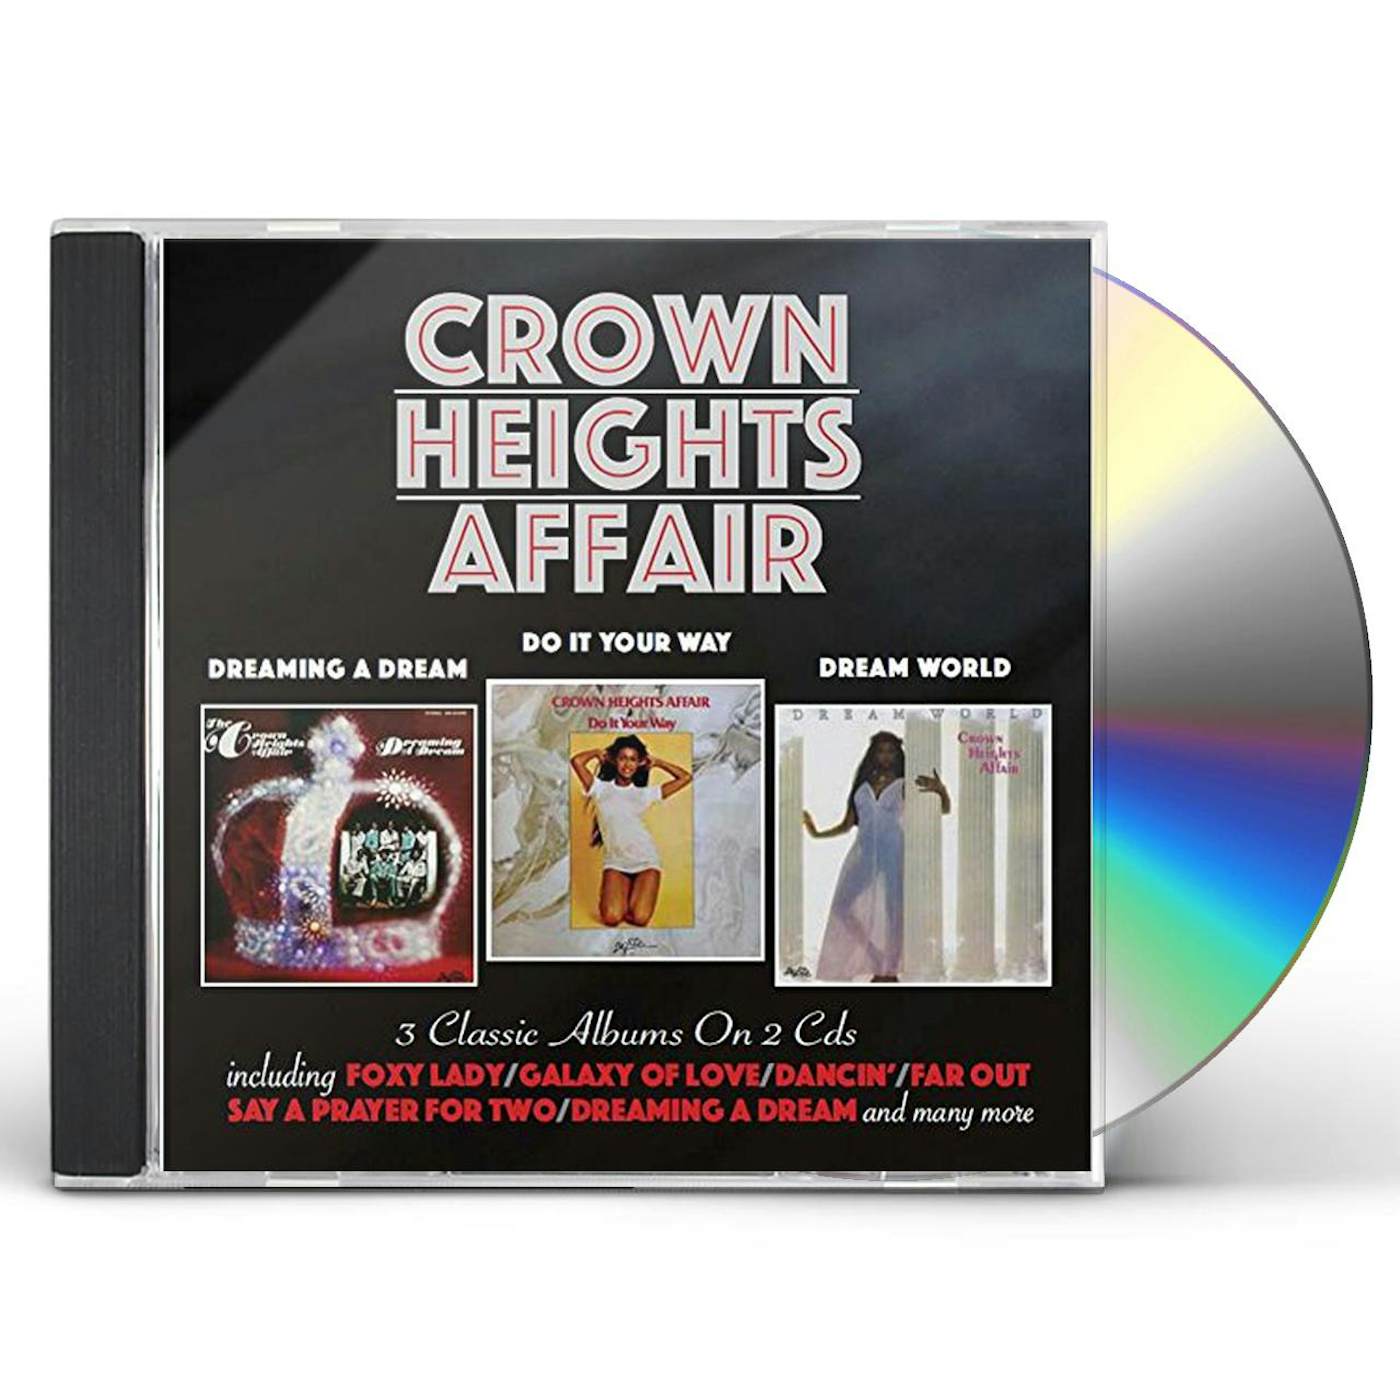 Crown Heights Affair DREAMING A DREAM / DO IT YOUR WAY / DREAM WORLD CD